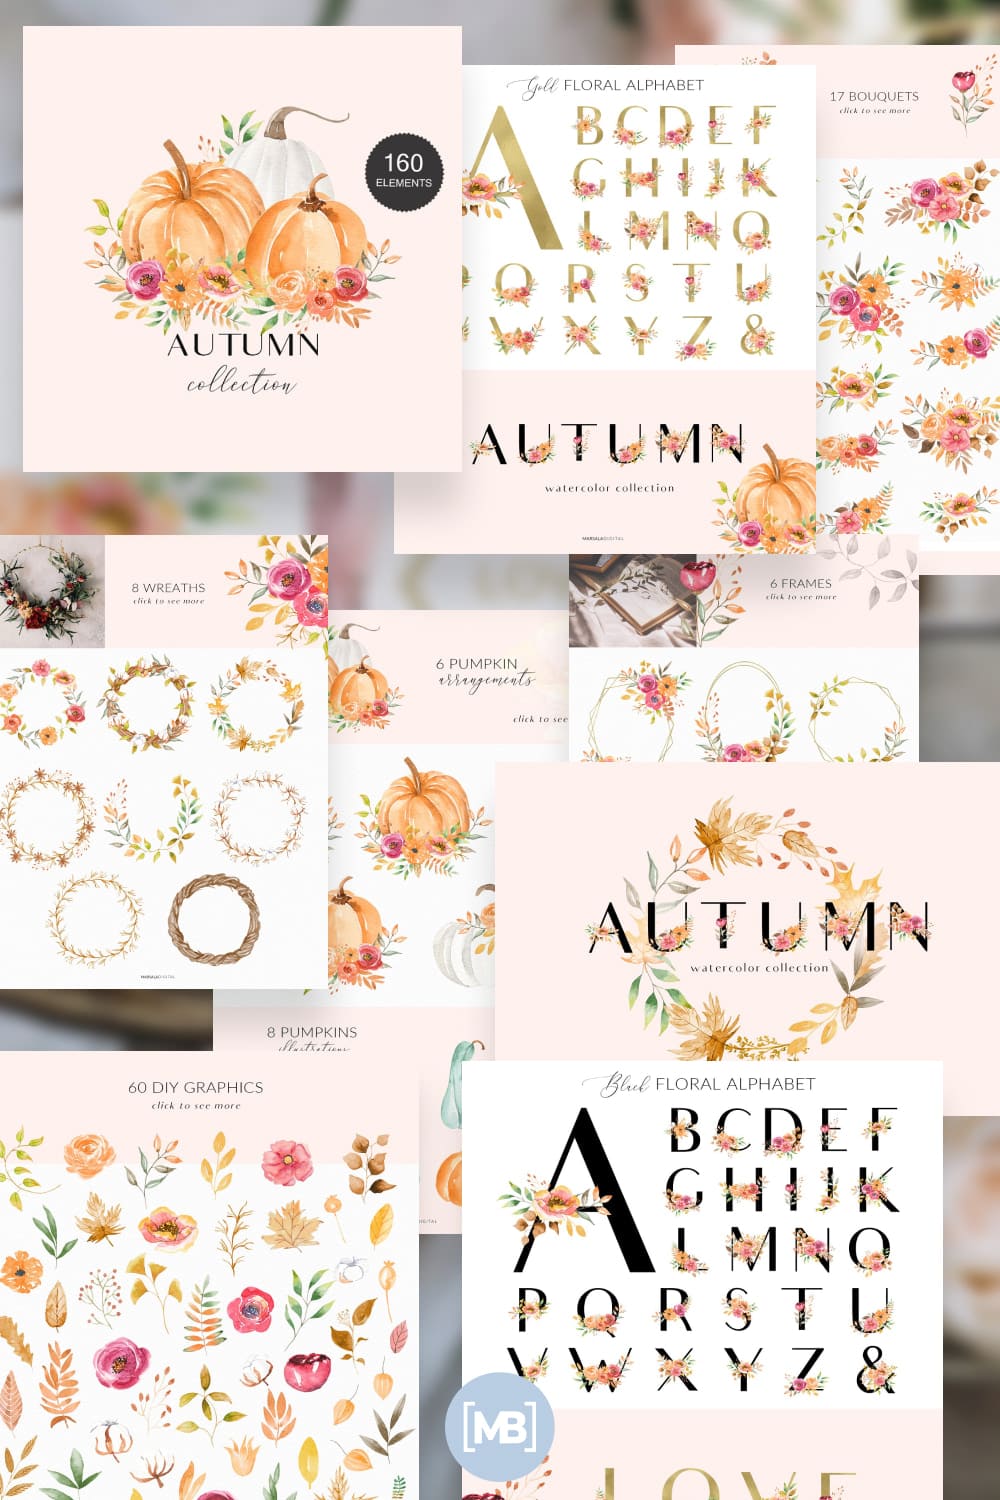 106 Autumn Watercolor Collection 160